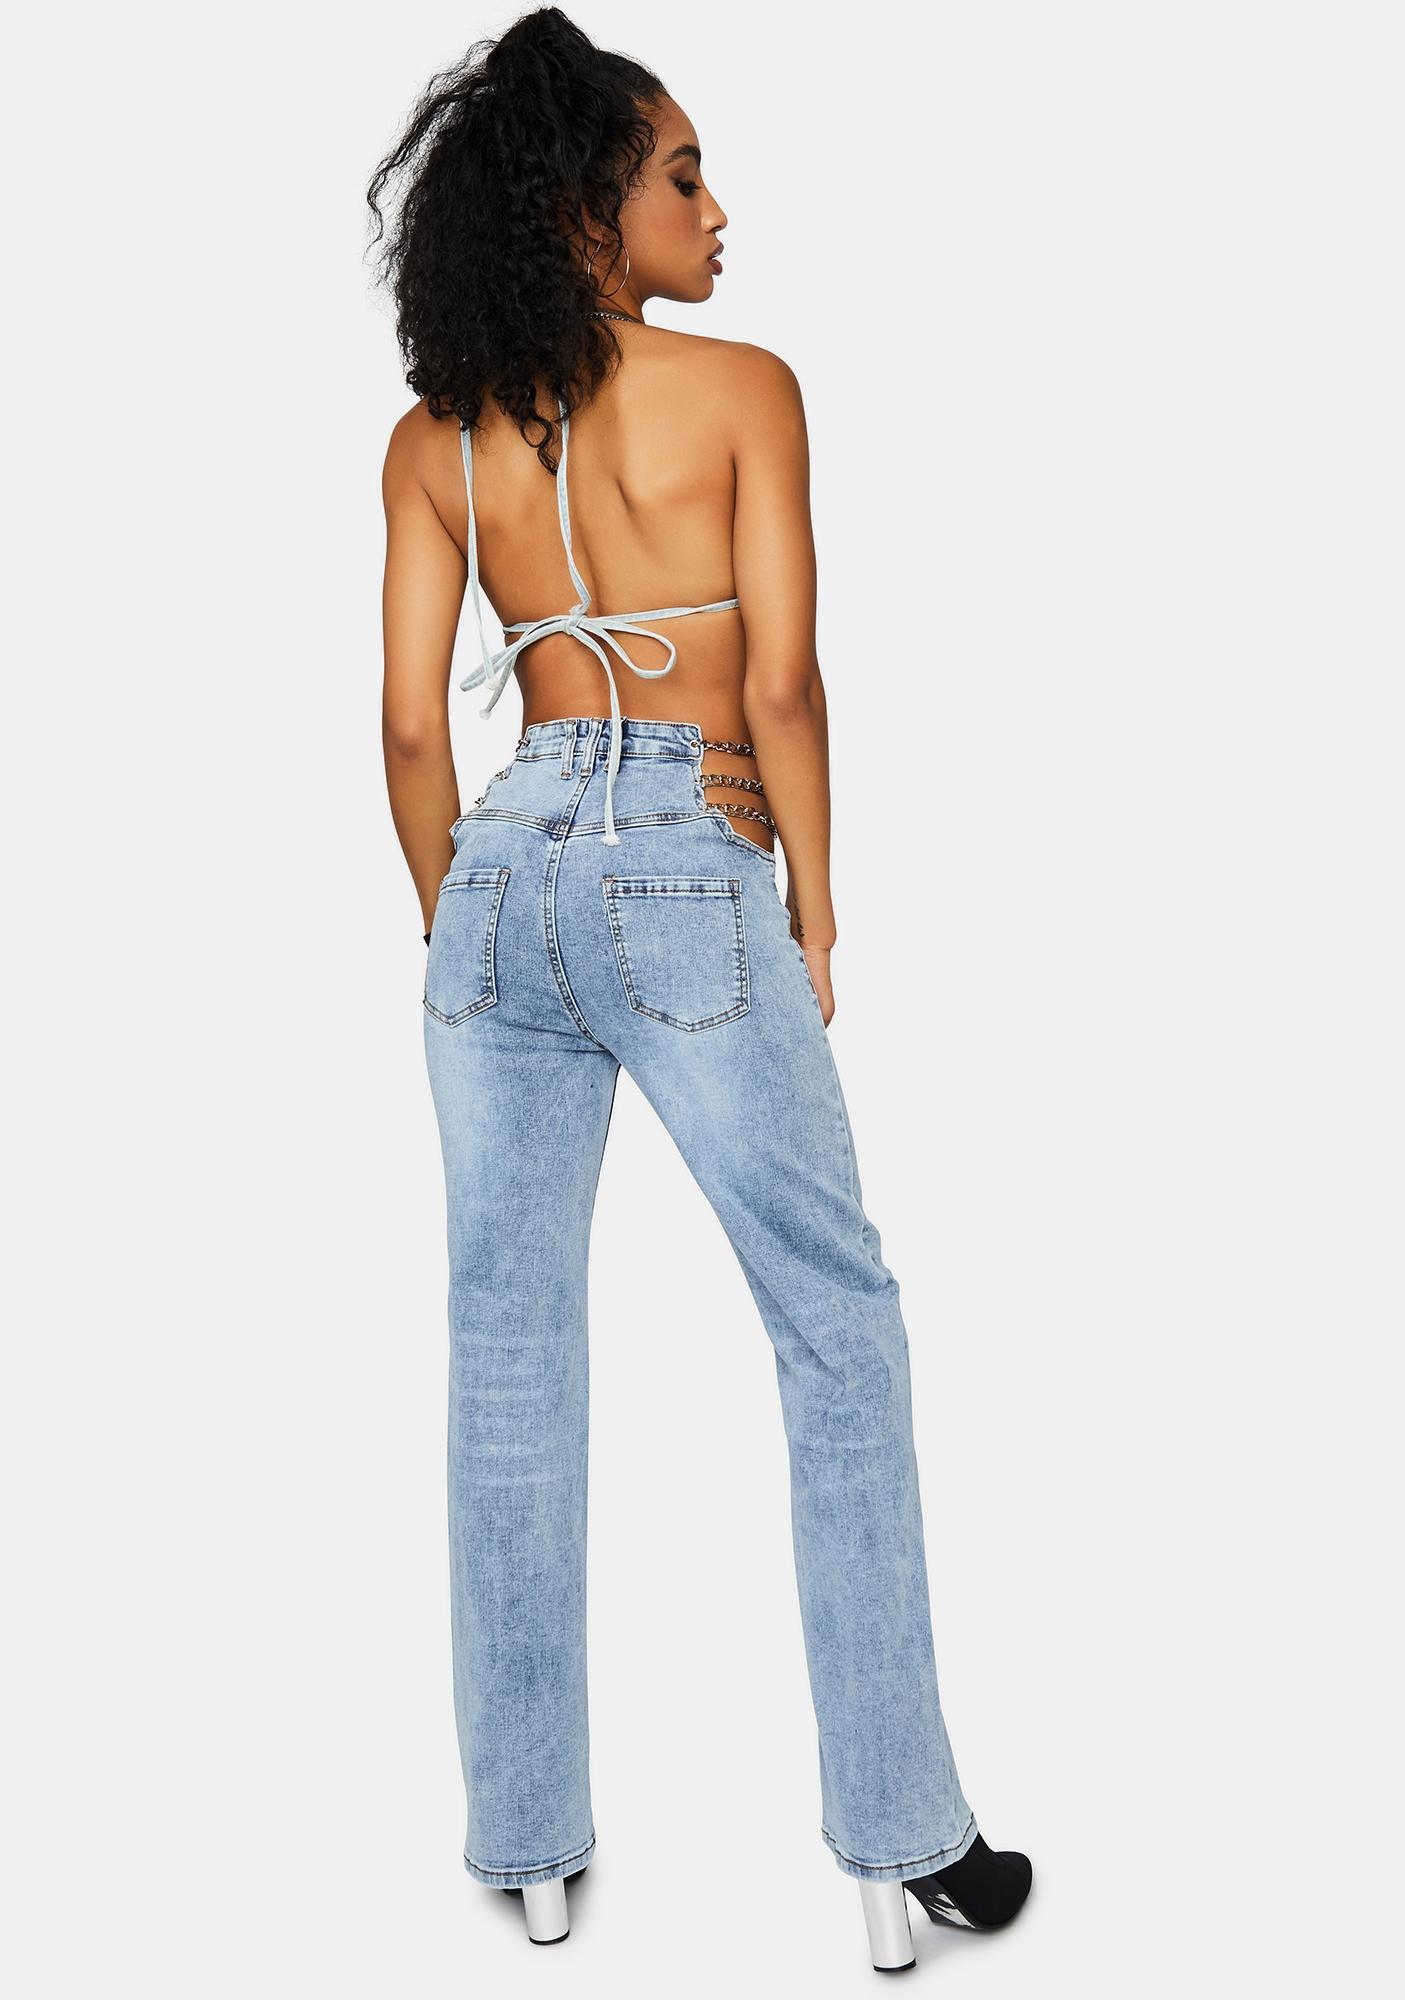 Hip Cut Out Jeans With Chains - Blue | Dolls Kill